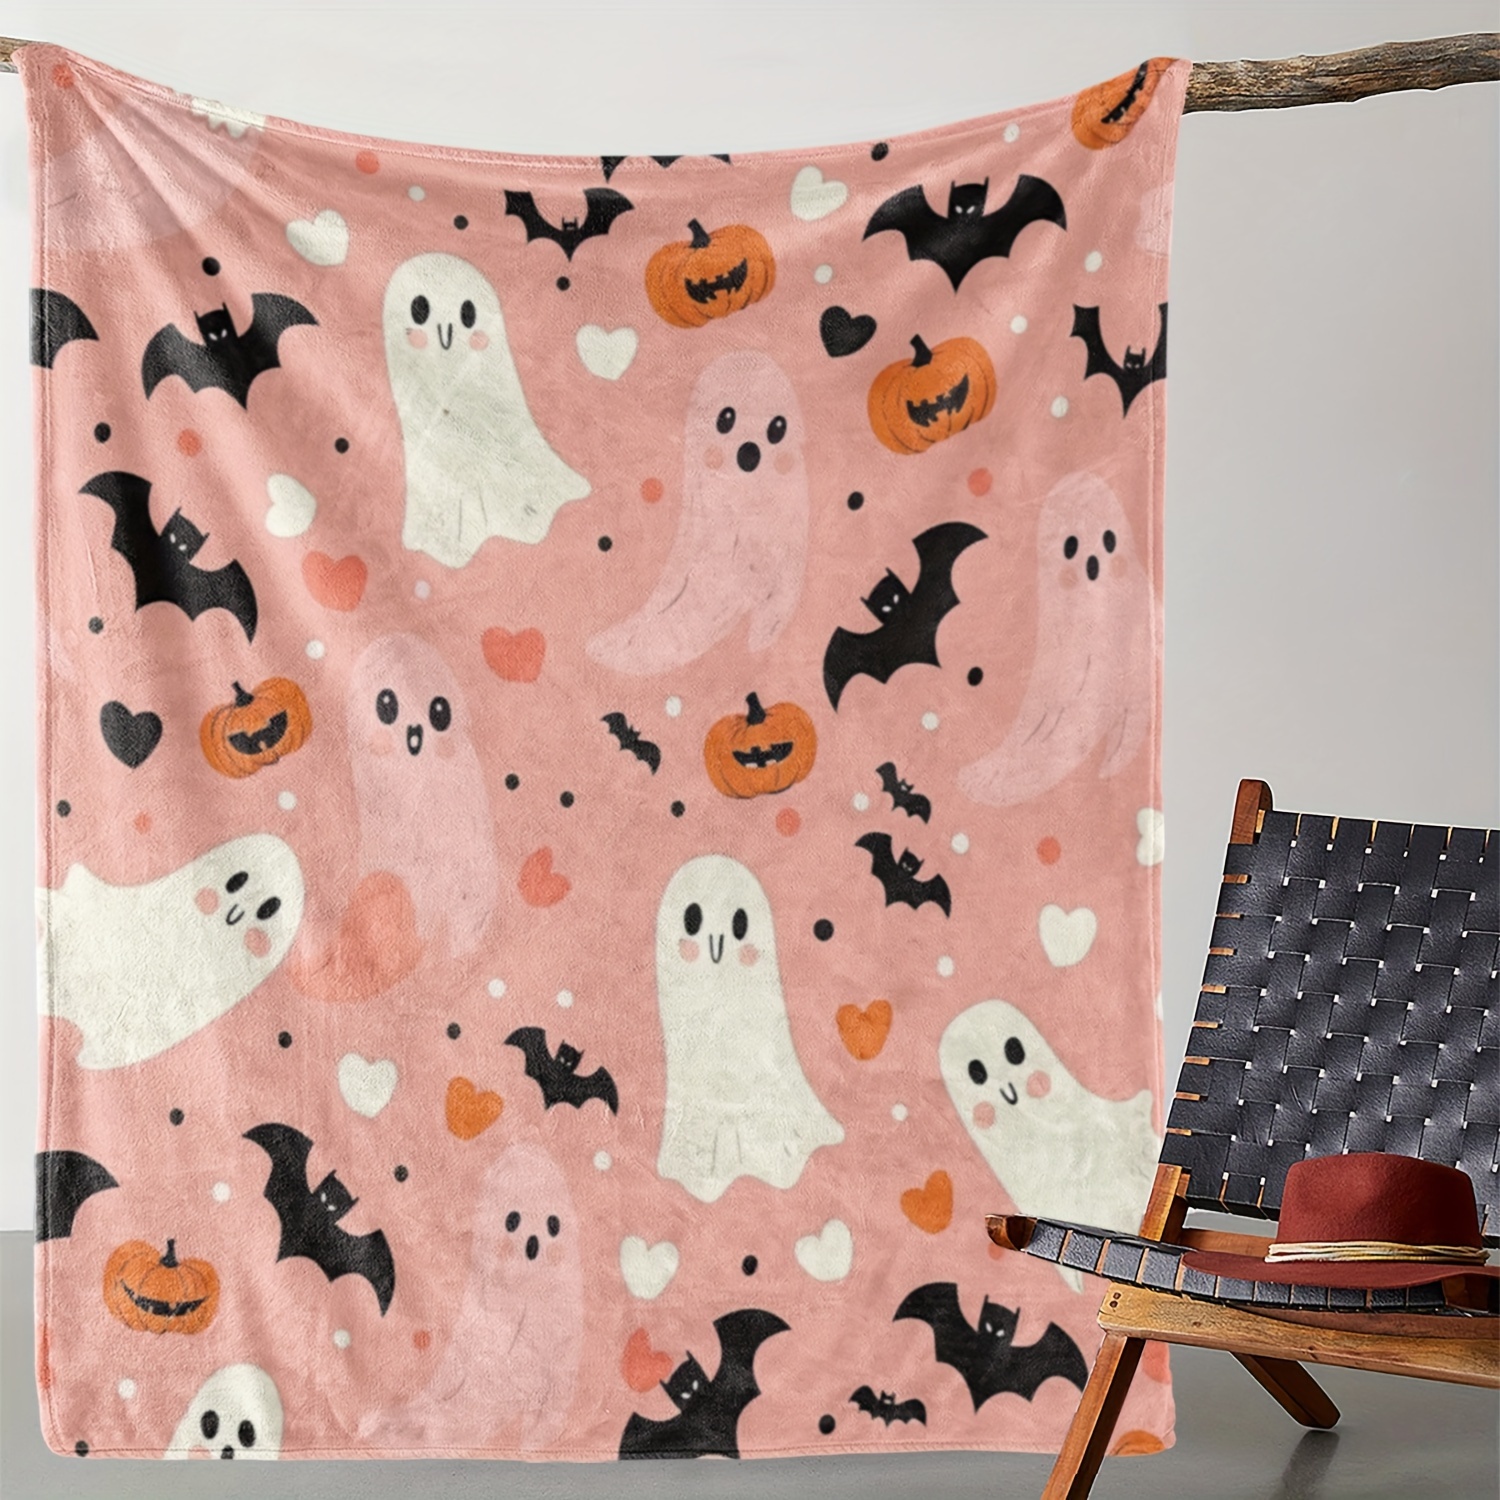 

seasonal Delight" Cozy Flannel Halloween Blanket - Pink Ghost, Pumpkin & Bat Print | Soft, Warm Throw For Couch, Bed, Car, Office, Camping | All-season Gift Blanket